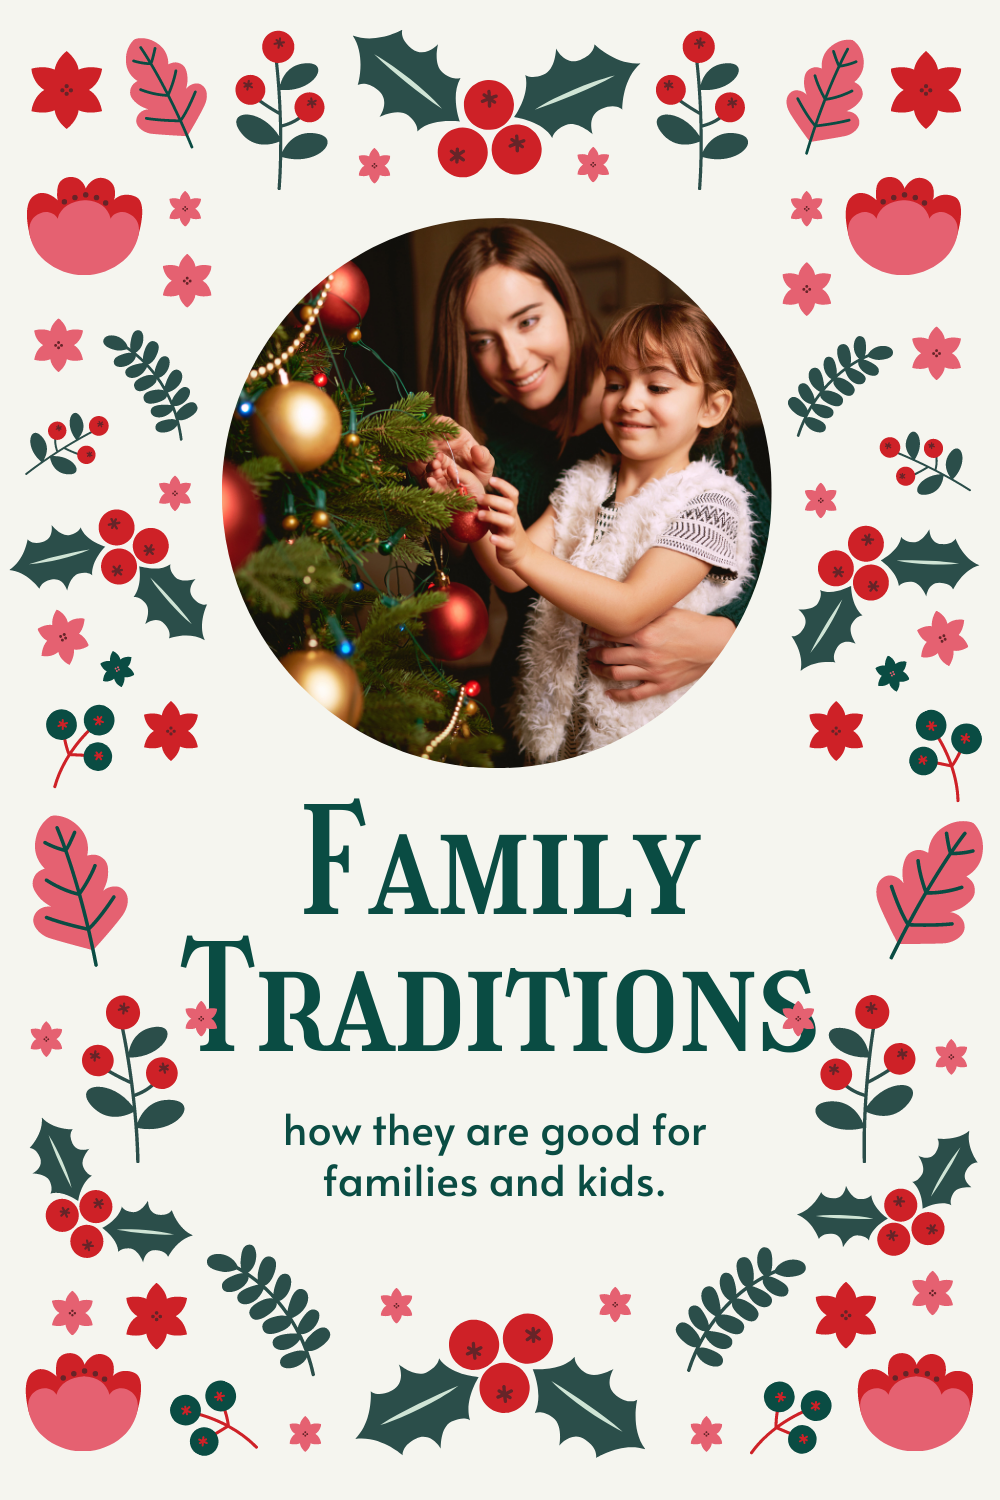 Family traditions- How they are good for families and kids